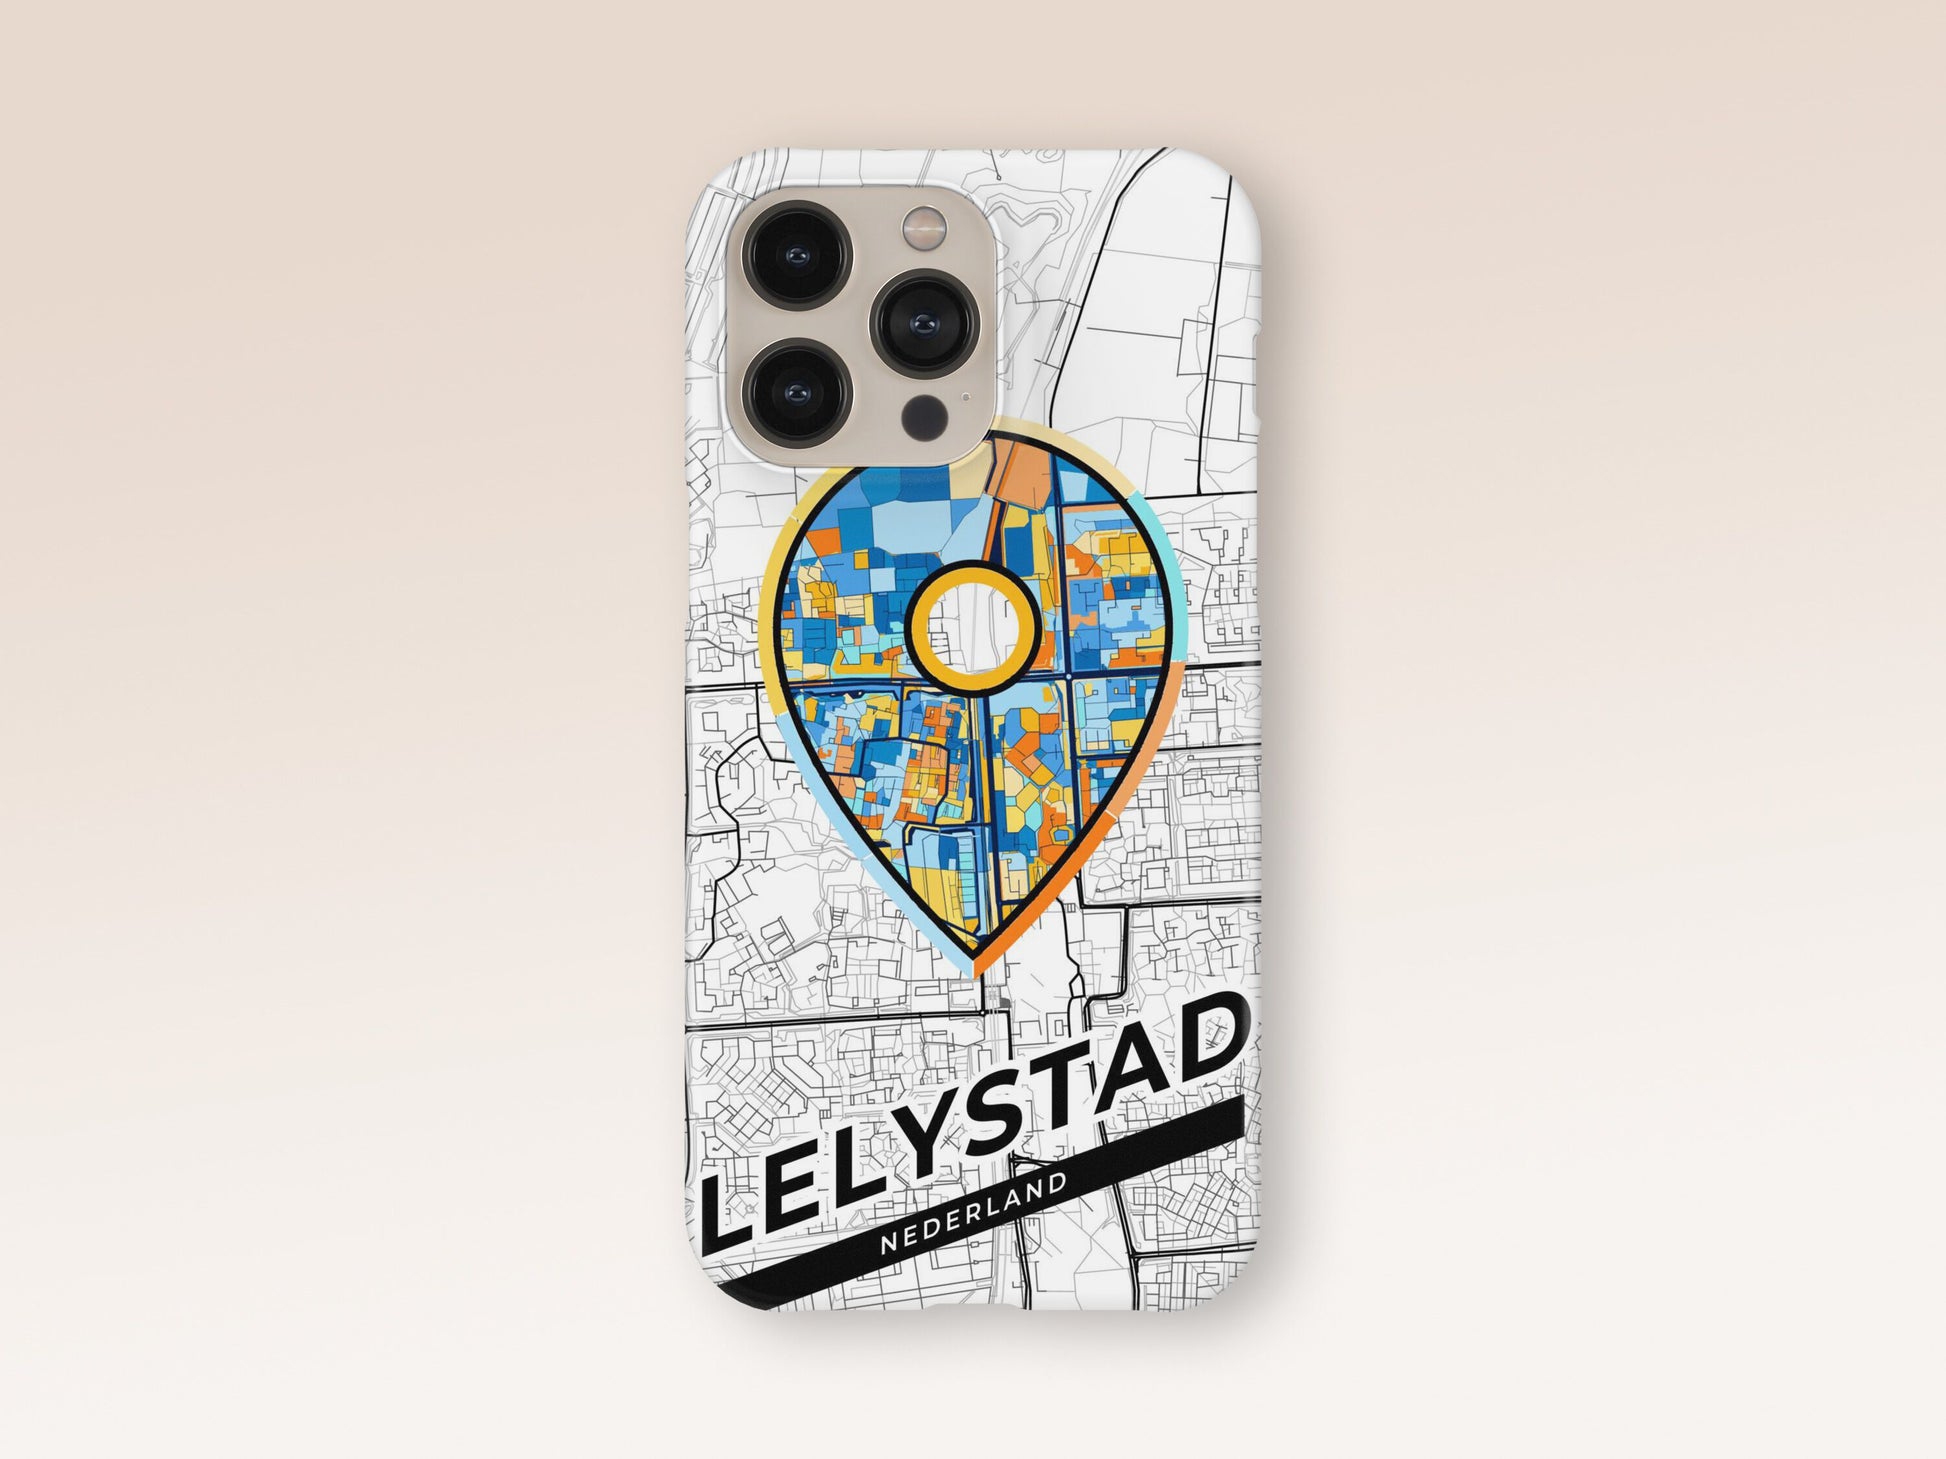 Lelystad Netherlands slim phone case with colorful icon. Birthday, wedding or housewarming gift. Couple match cases. 1